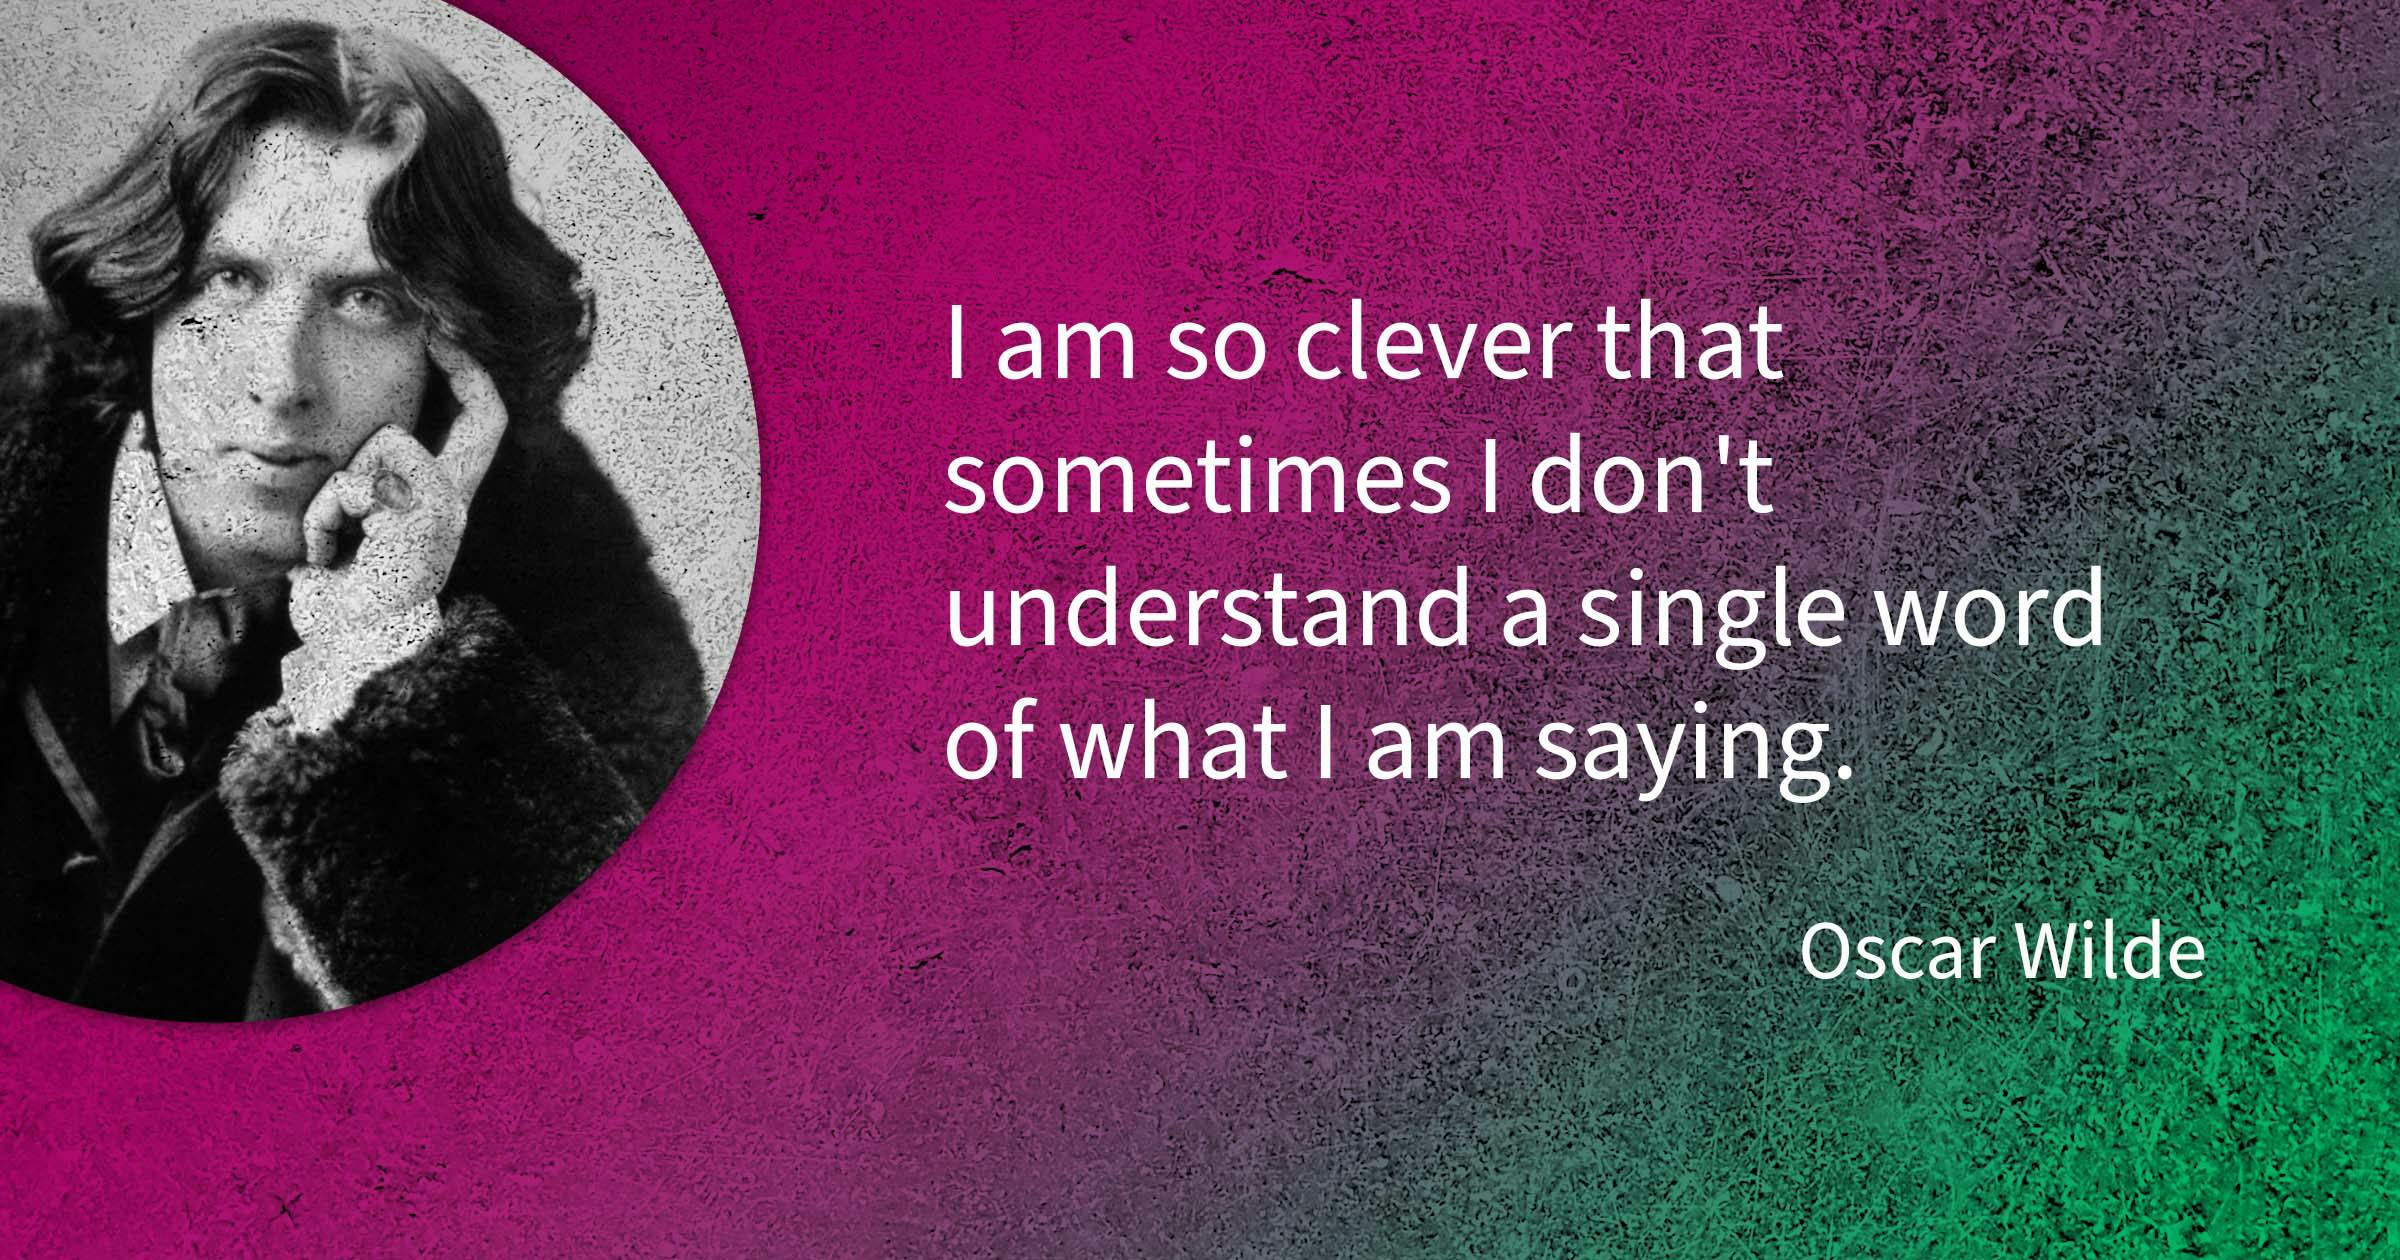 Oscar Wilde quote: I am so clever that sometimes I don't understand a single word of what I am saying.